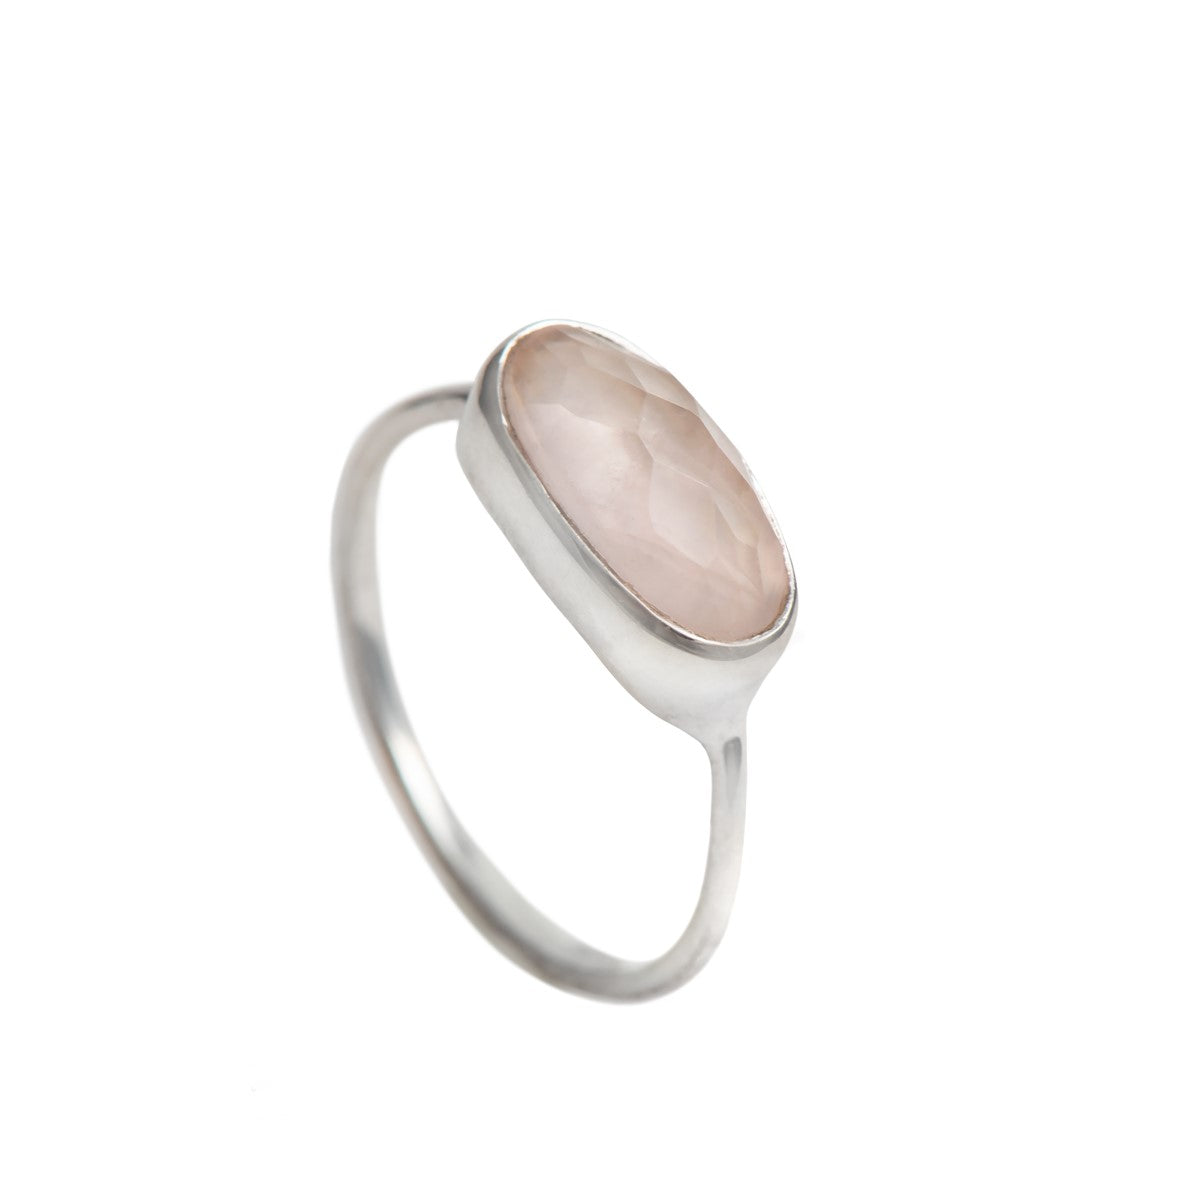 Faceted Oval Cut Natural Gemstone Sterling Silver Fine Band Ring - Rose Quartz